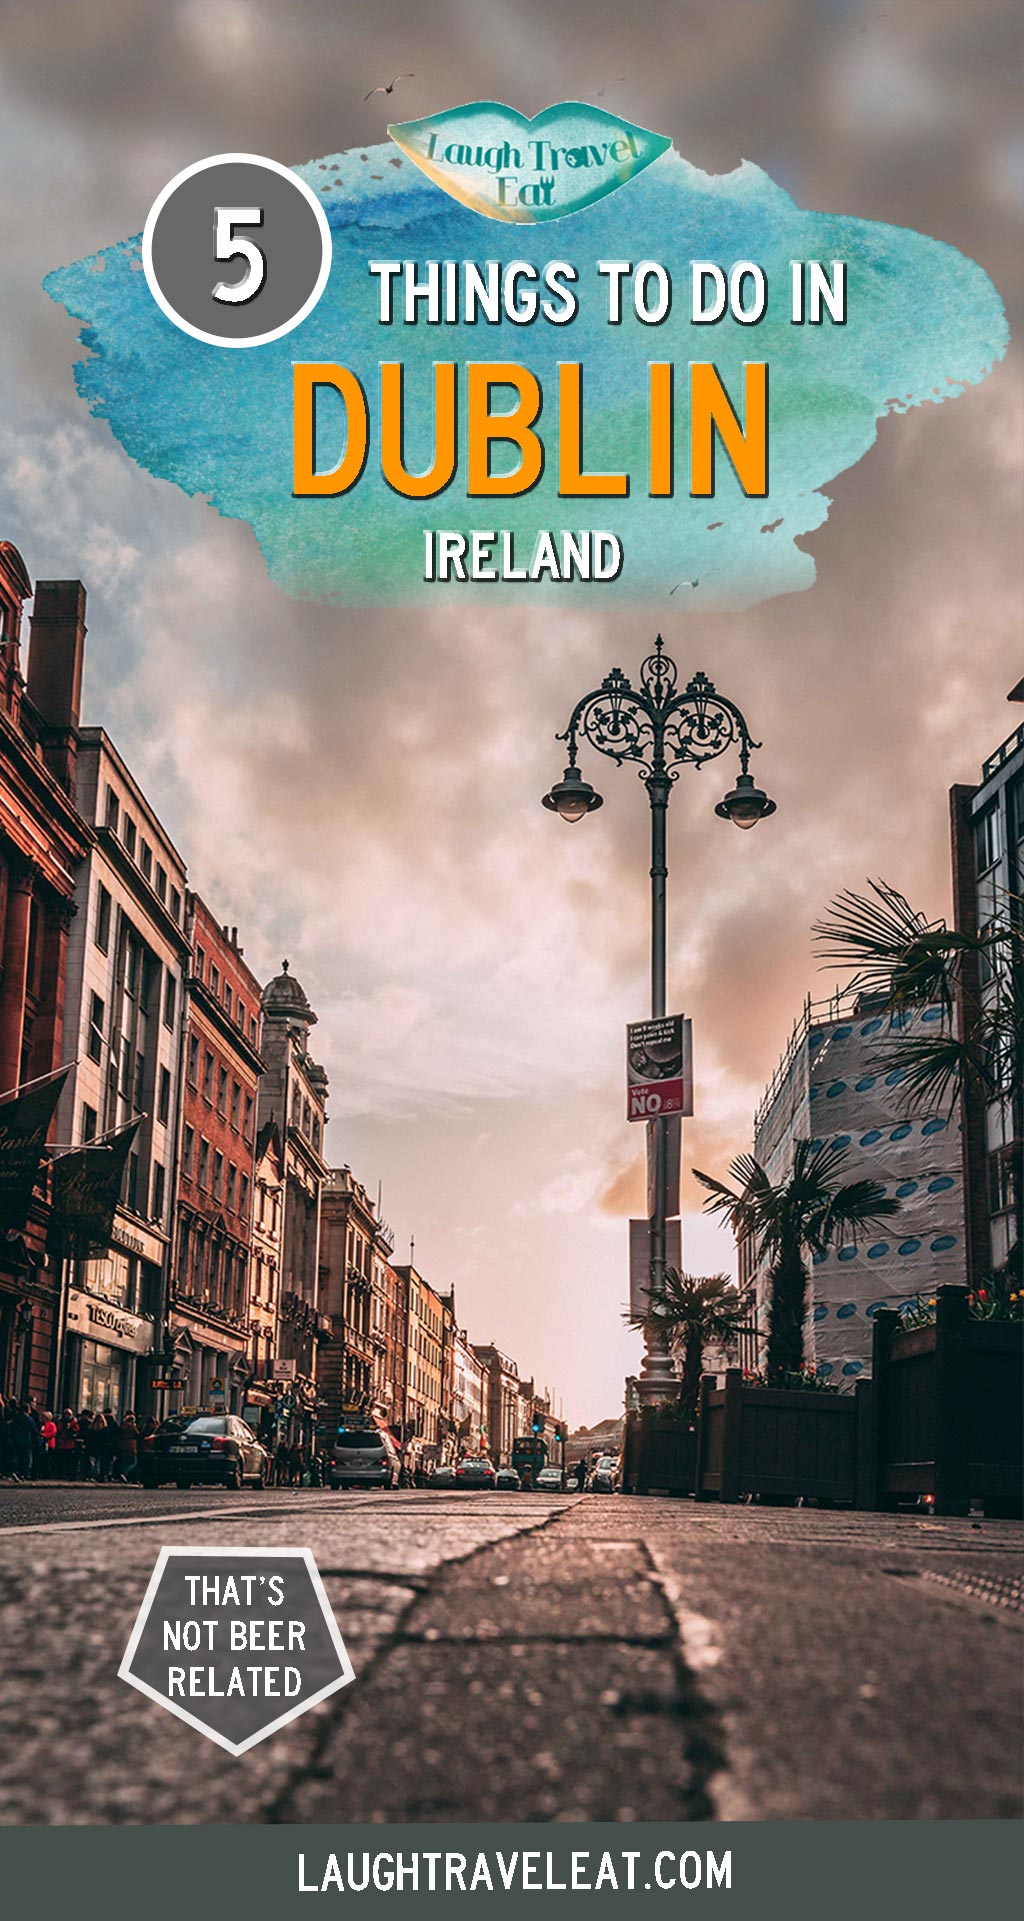 What are the things to do in Dublin if you, like us, aren’t interested in the alcohol part of the city : there's still things to do #Dublin #Ireland